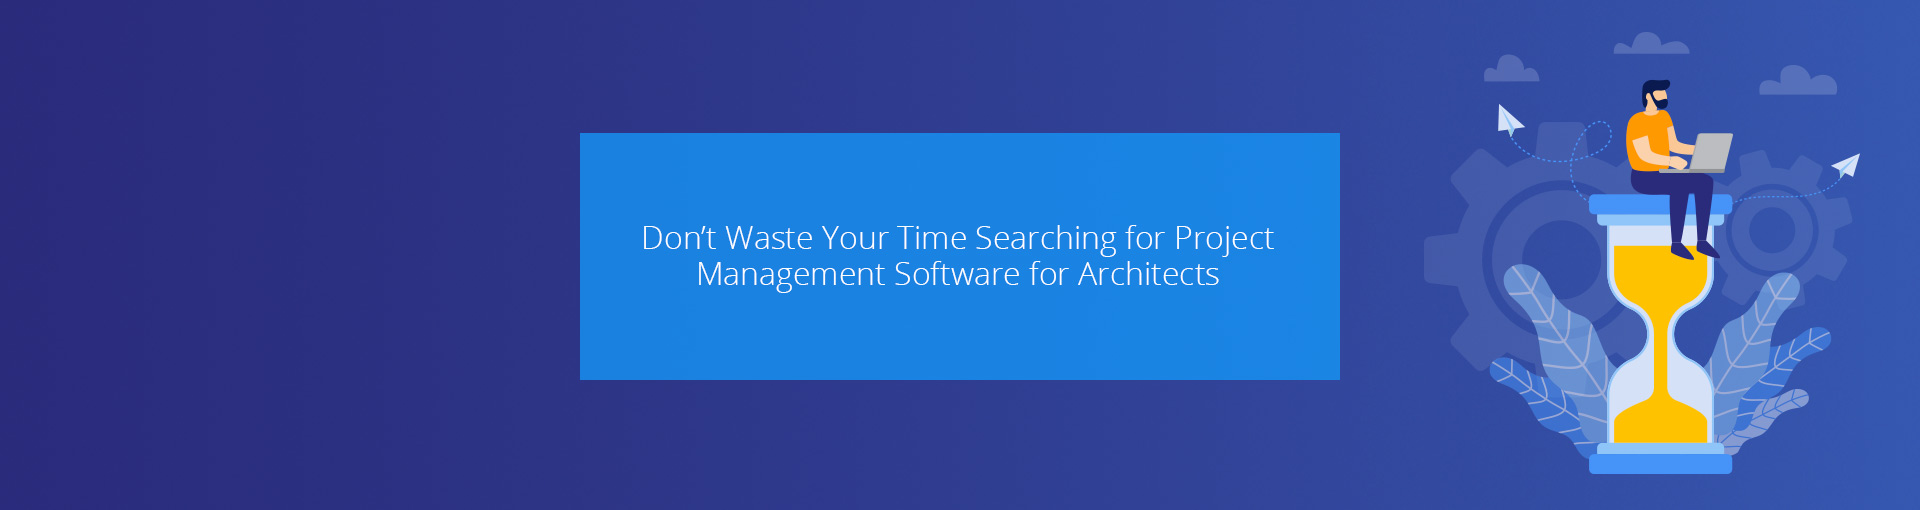 Don’t Waste Your Time Searching for Project Management Software for Architects